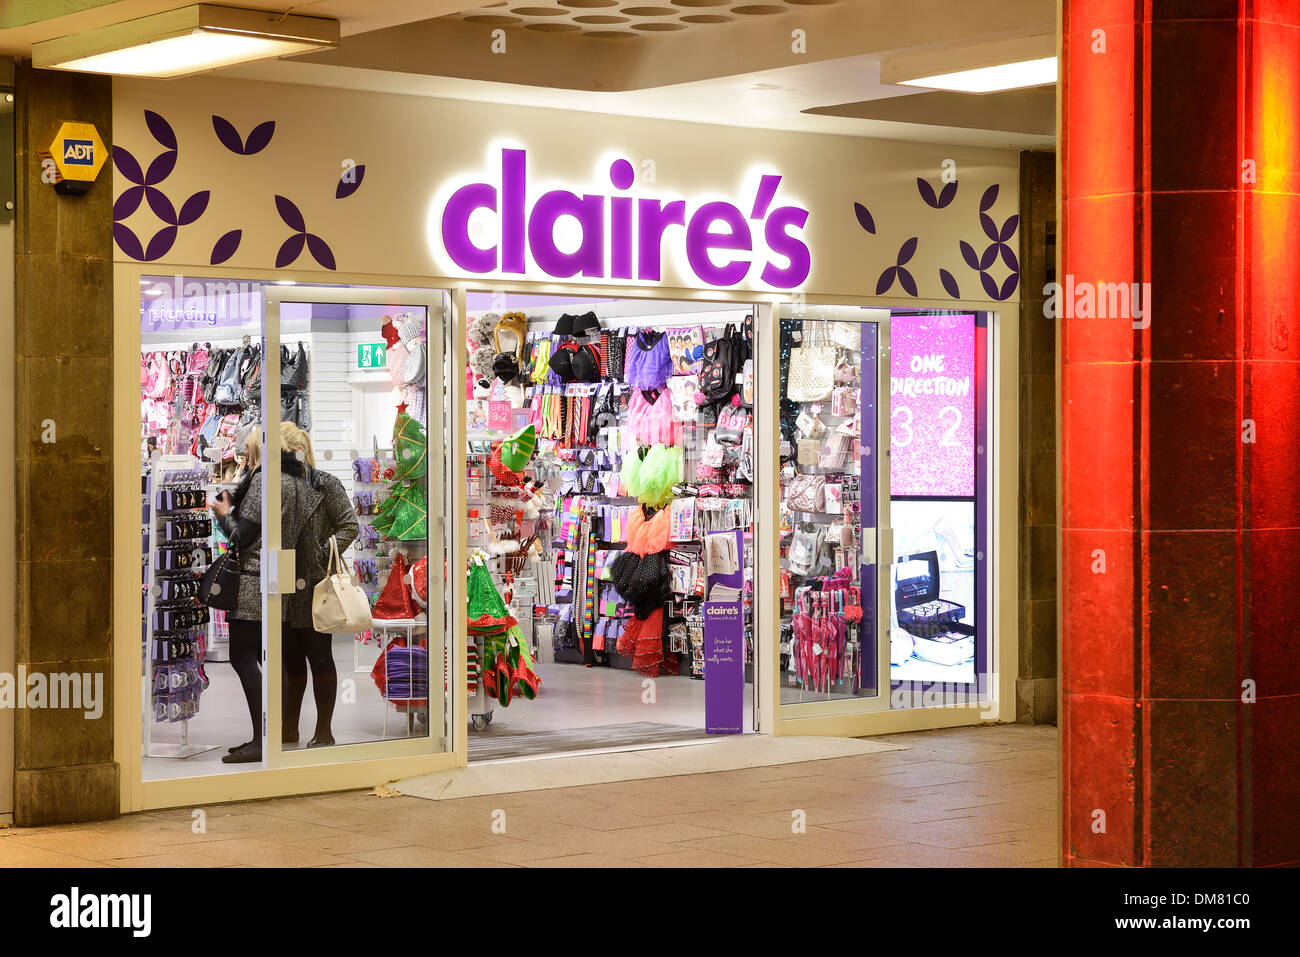 Exterior of a Clair's shop in Coventry city centre Stock Photo